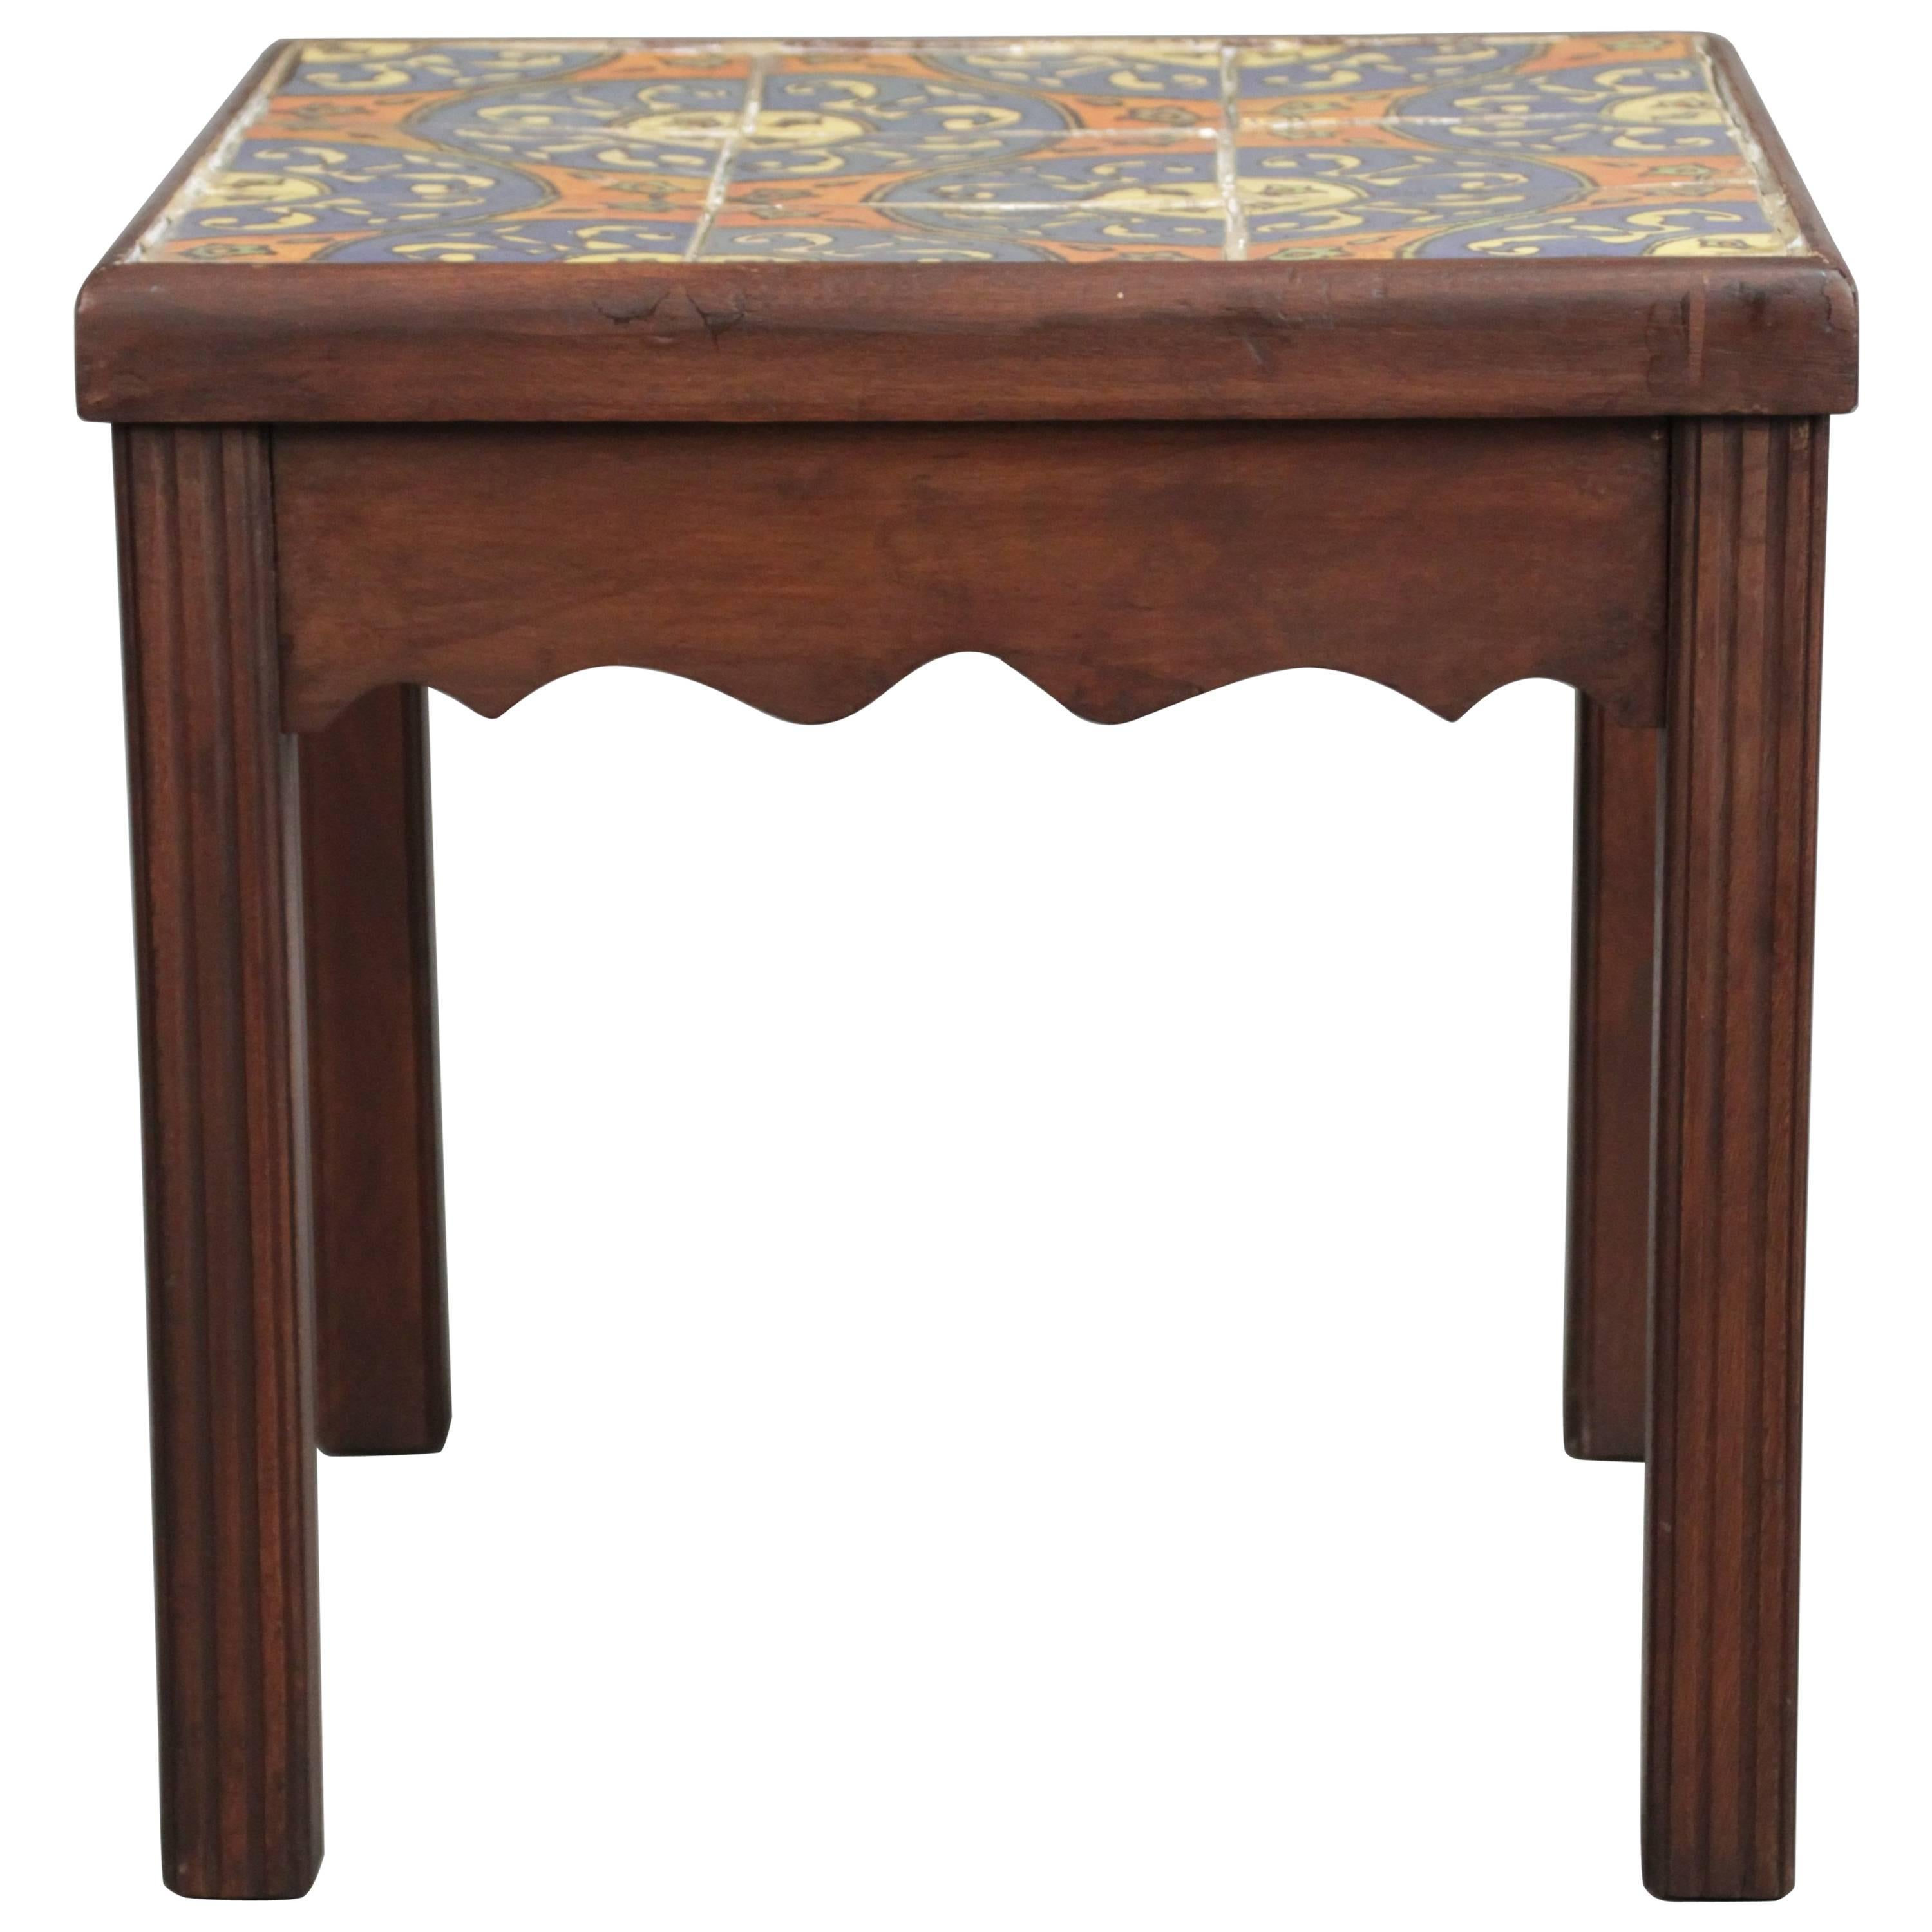 1920s California Tile Table with Nine Tiles For Sale